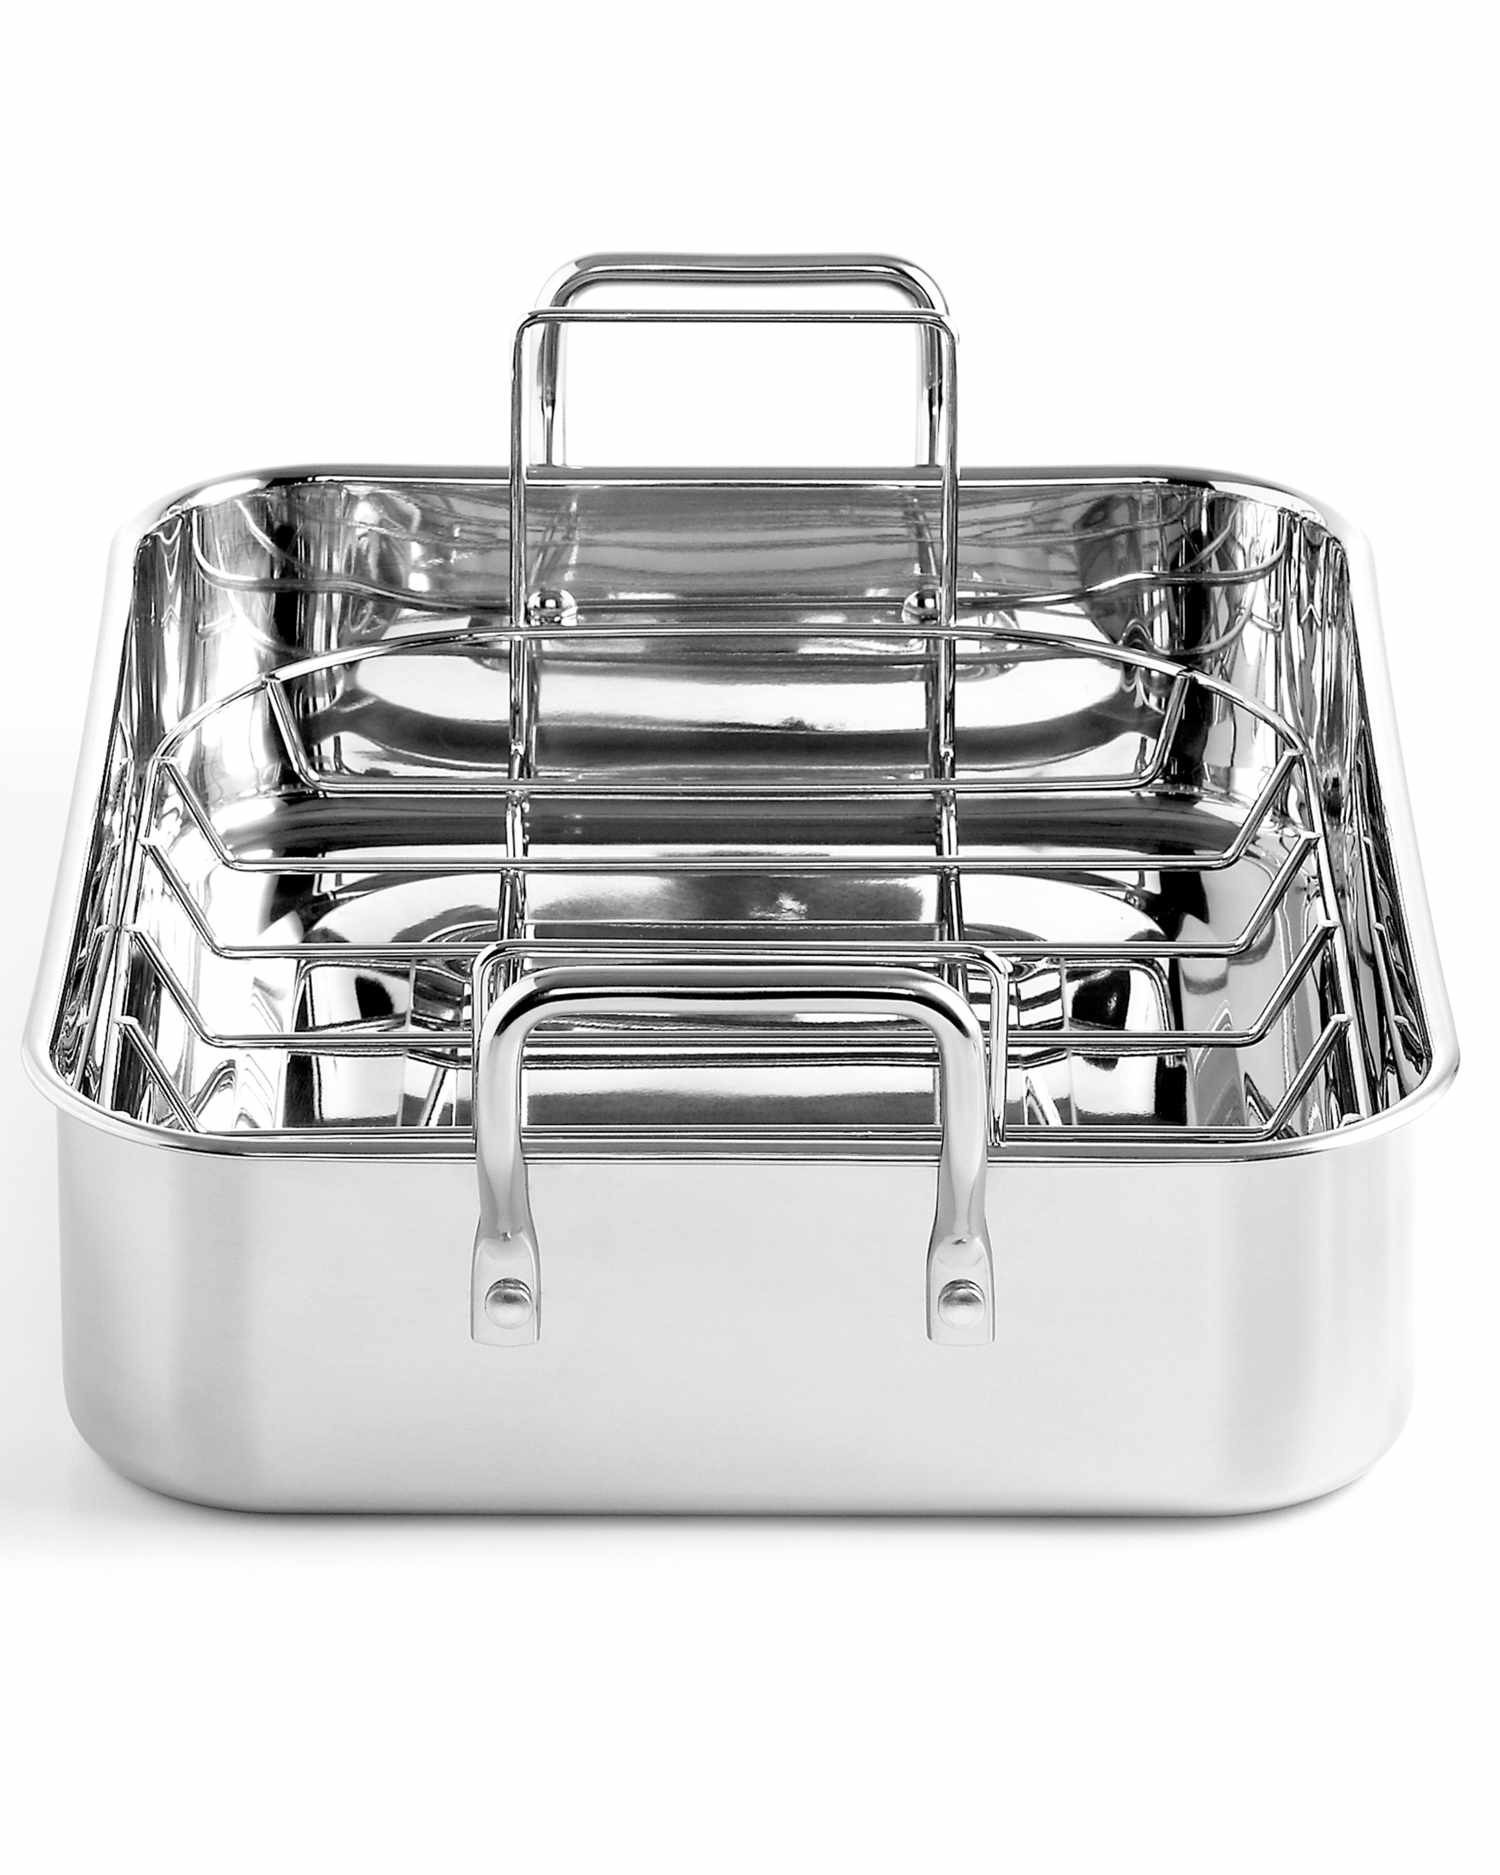 Martha Stewart Collection Stainless Steel Roaster with Roasting Rack